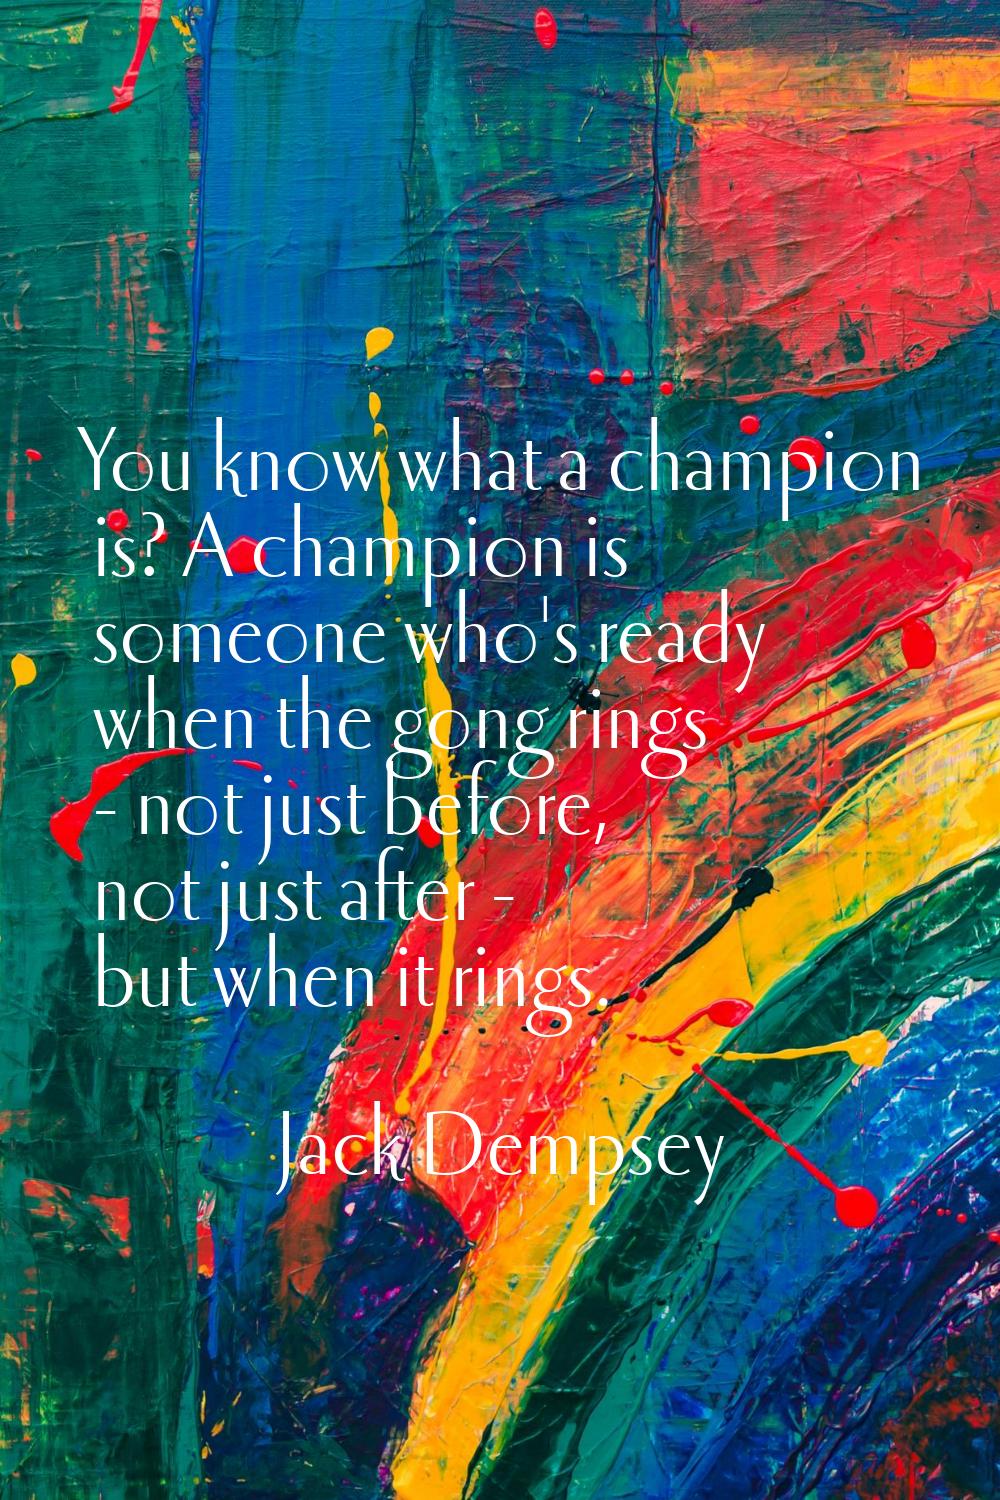 You know what a champion is? A champion is someone who's ready when the gong rings - not just befor